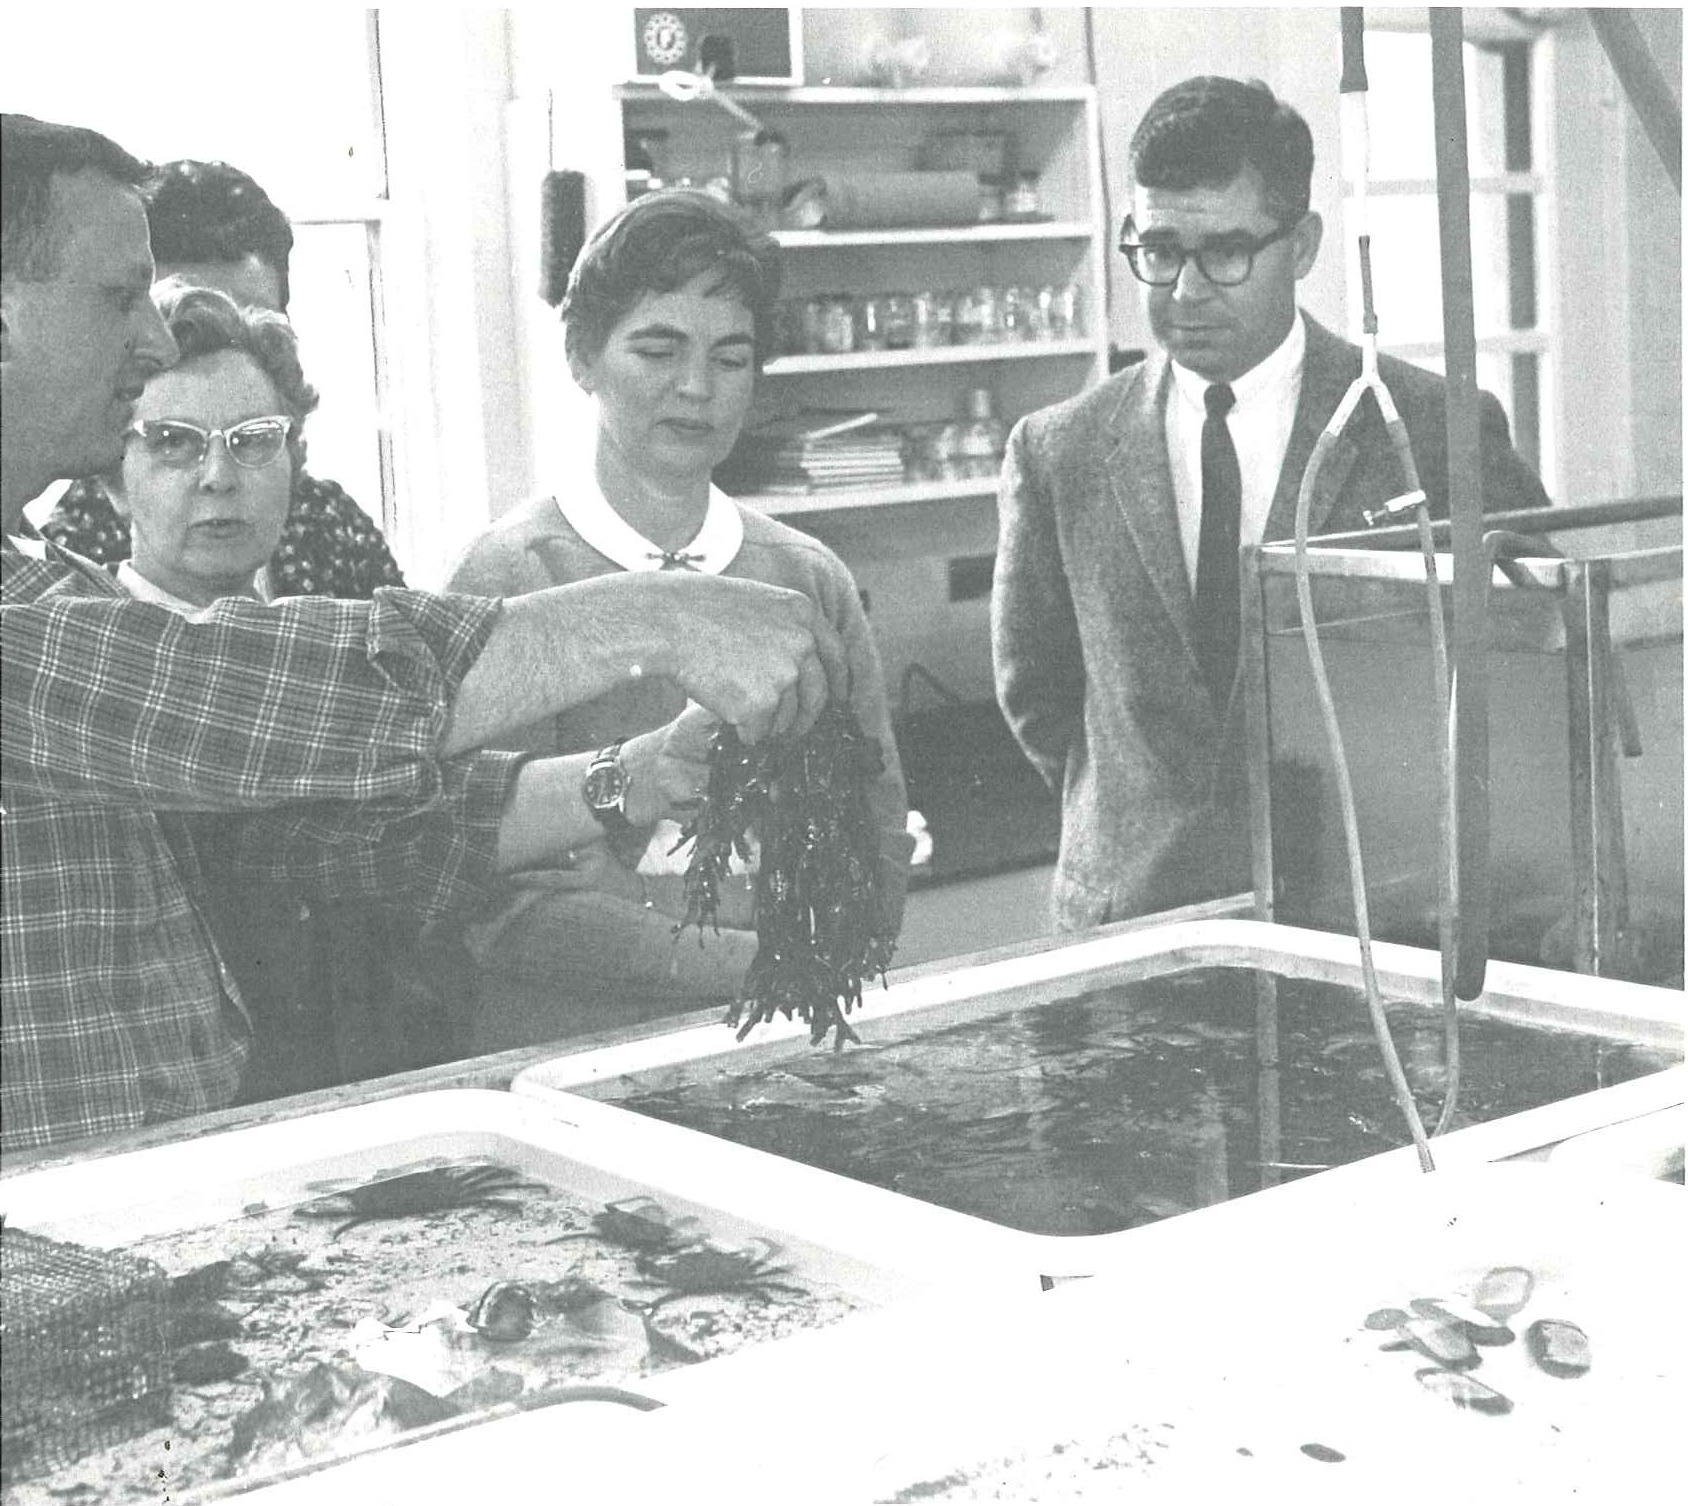 Dr. Mike Castagna with teachers group in old wet lab, 1969